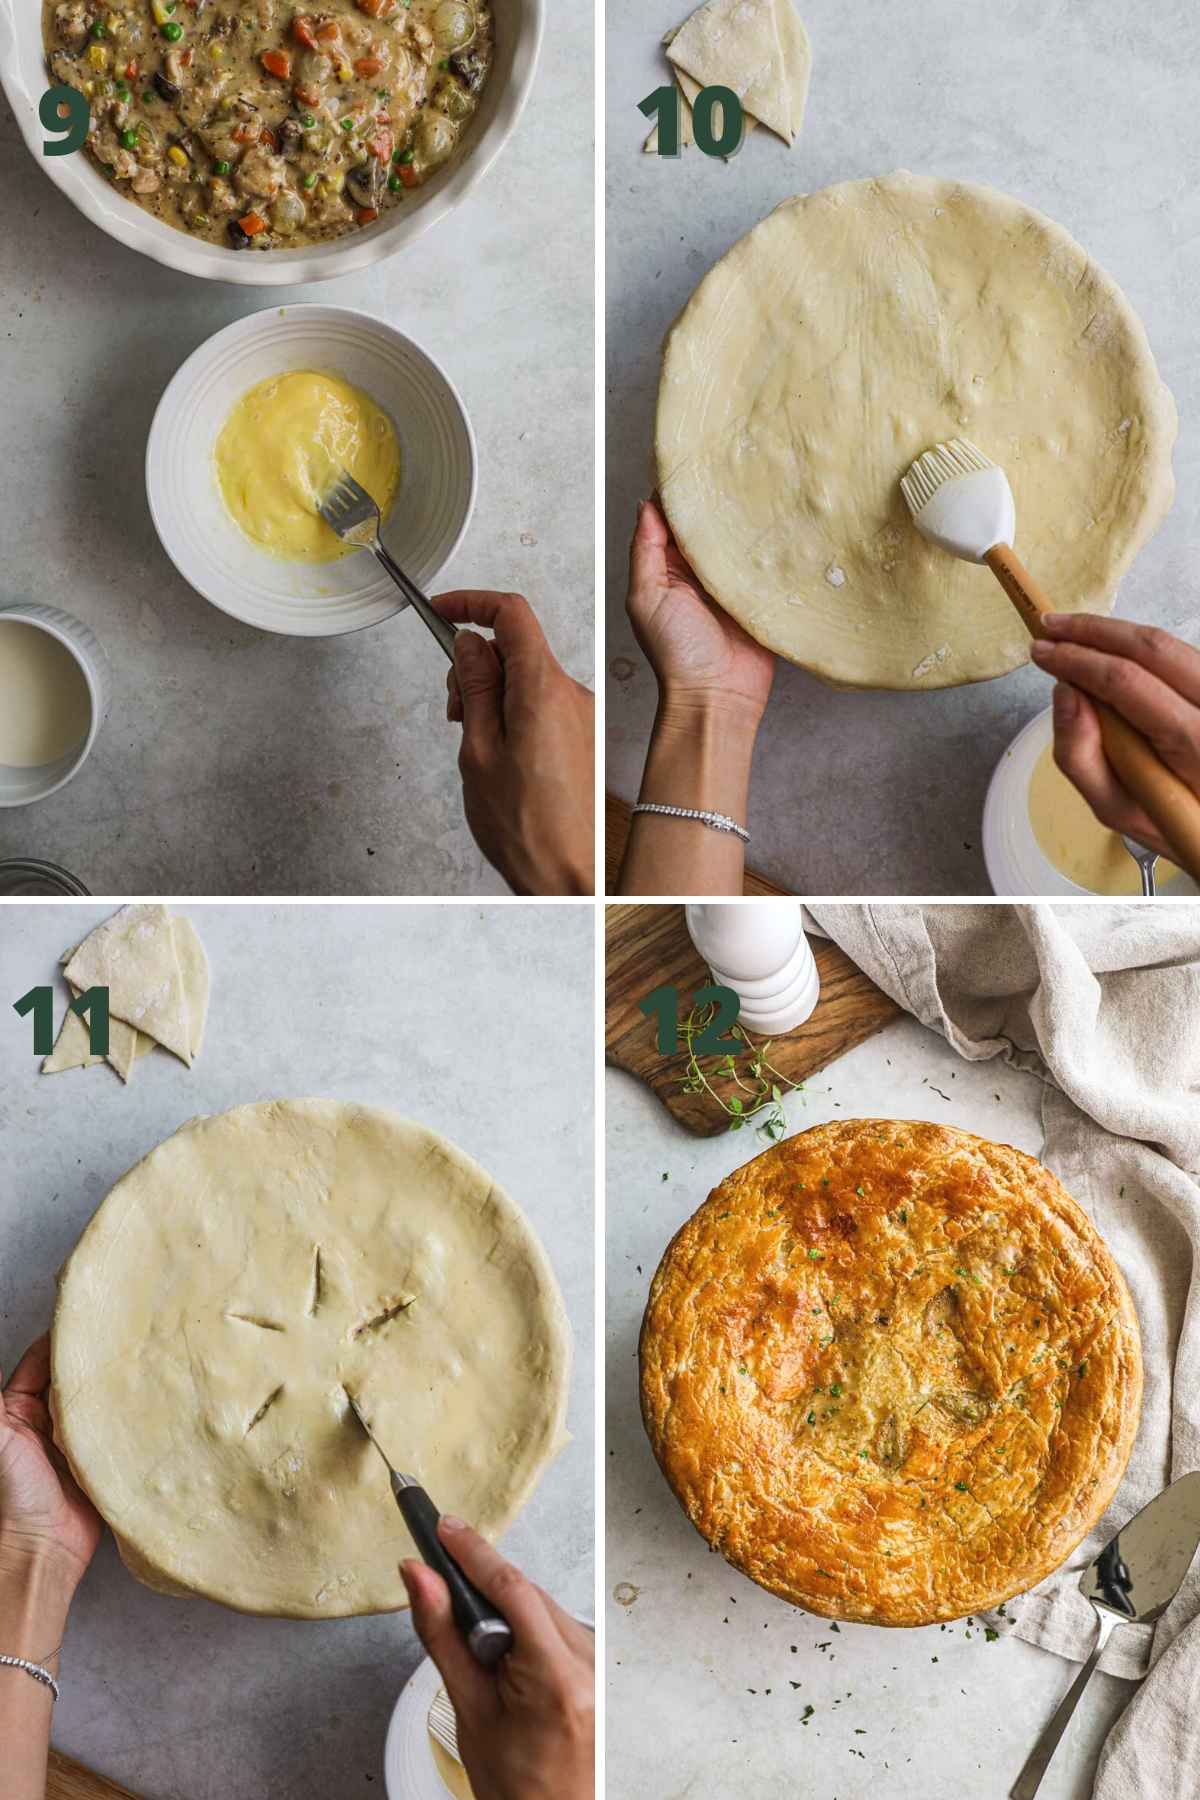 Steps to make vegetarian pot pie, whisk egg wash, add crust and brush with egg wash, cut splits in crust, and bake.